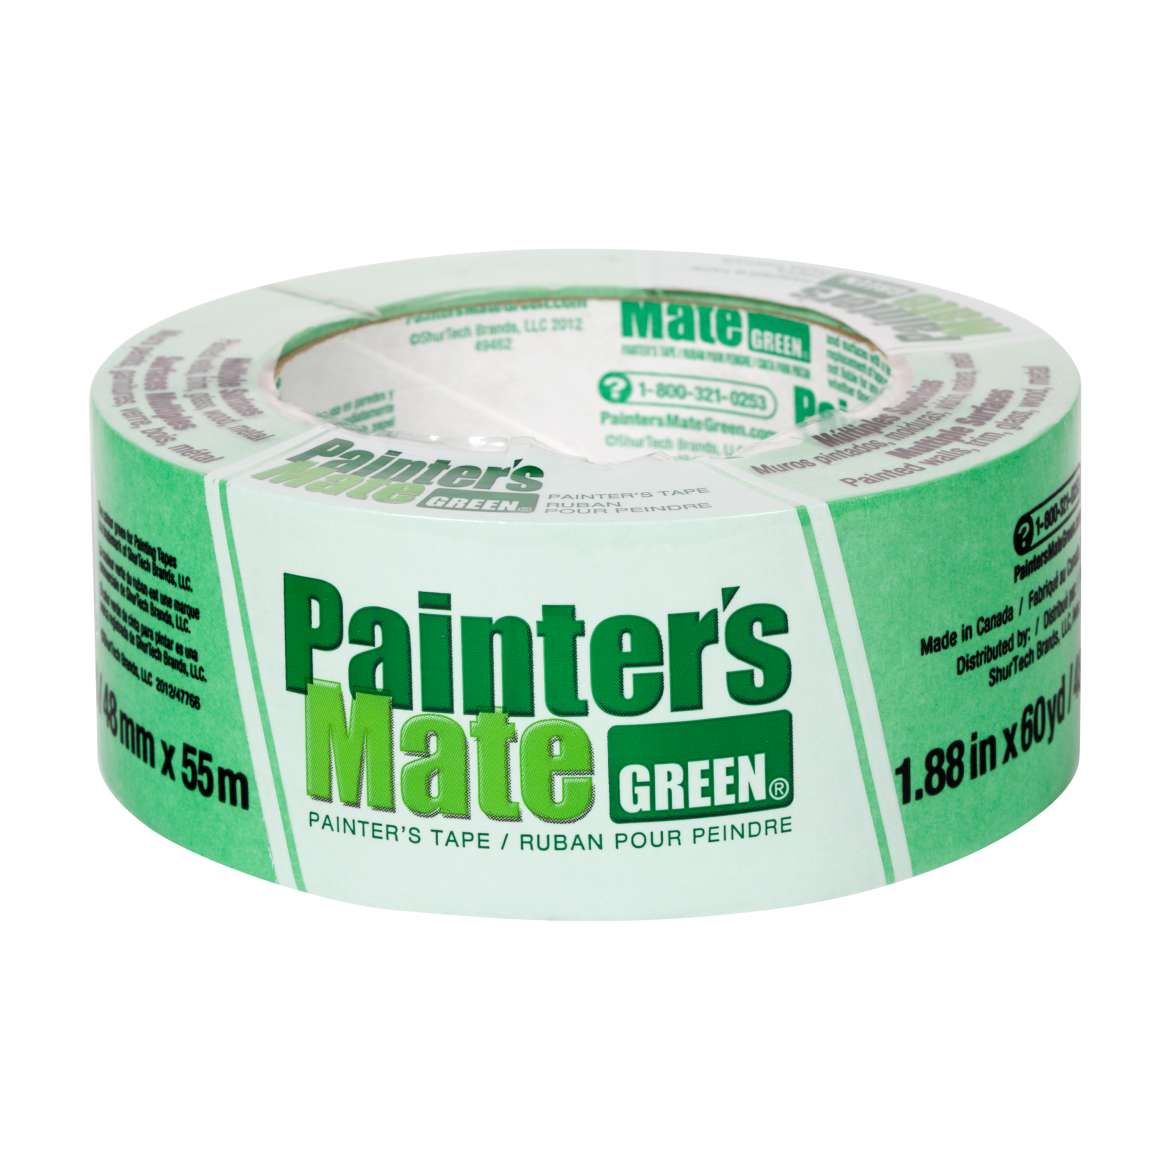 Painter's Mate Green Painter's Tape - Green, 1.88 in. x 60 yd.